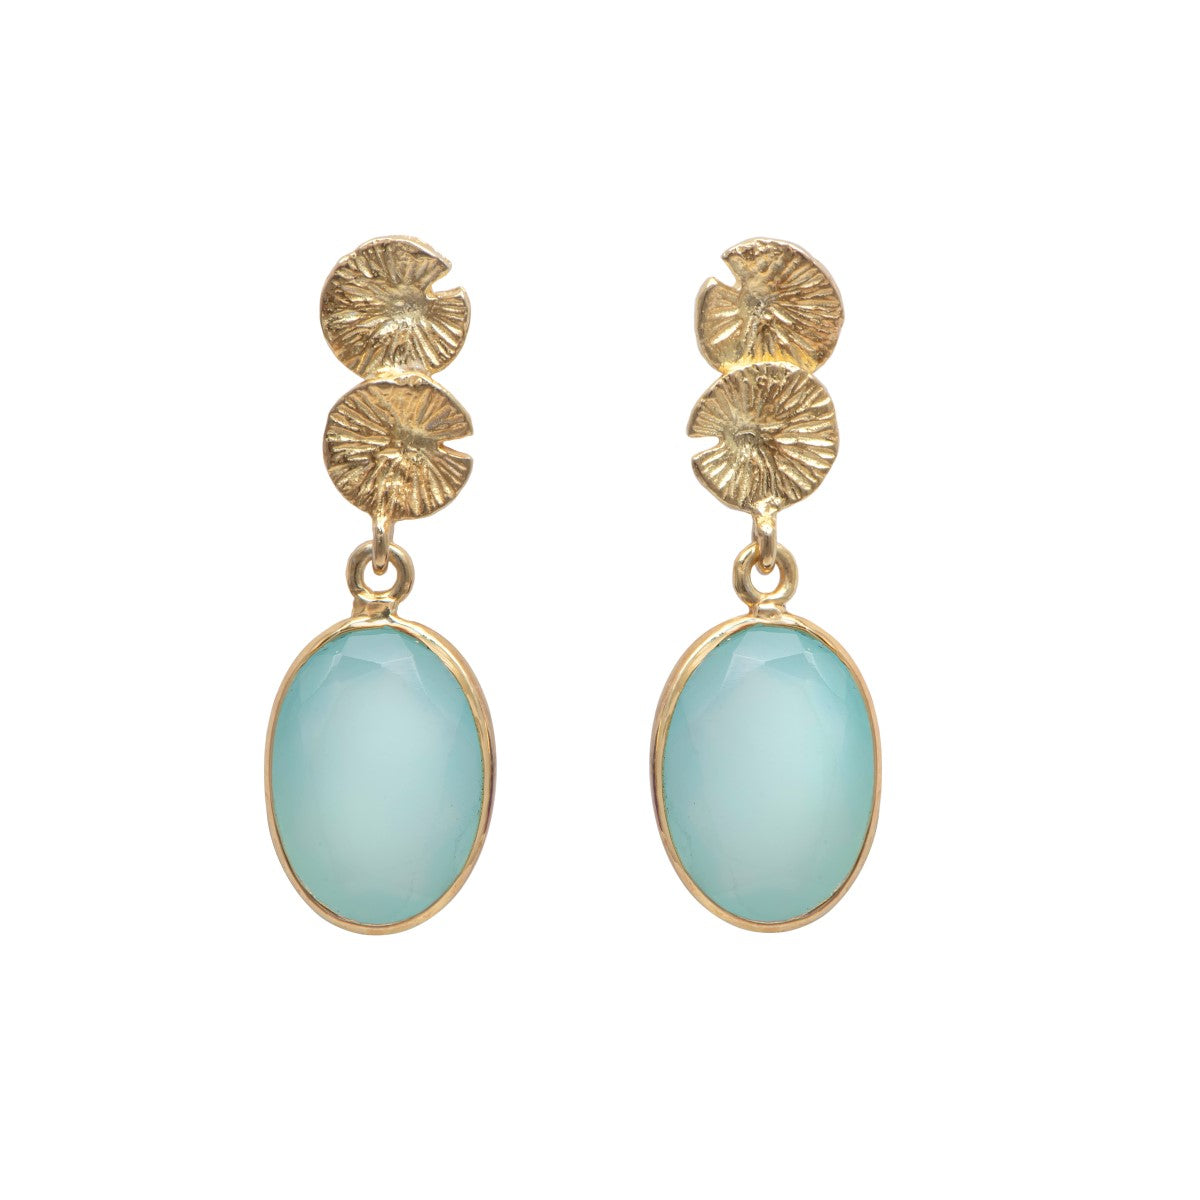 Lily Pad Earrings in Gold Plated Sterling Silver with an Aqua Chalcedony Gemstone Drop